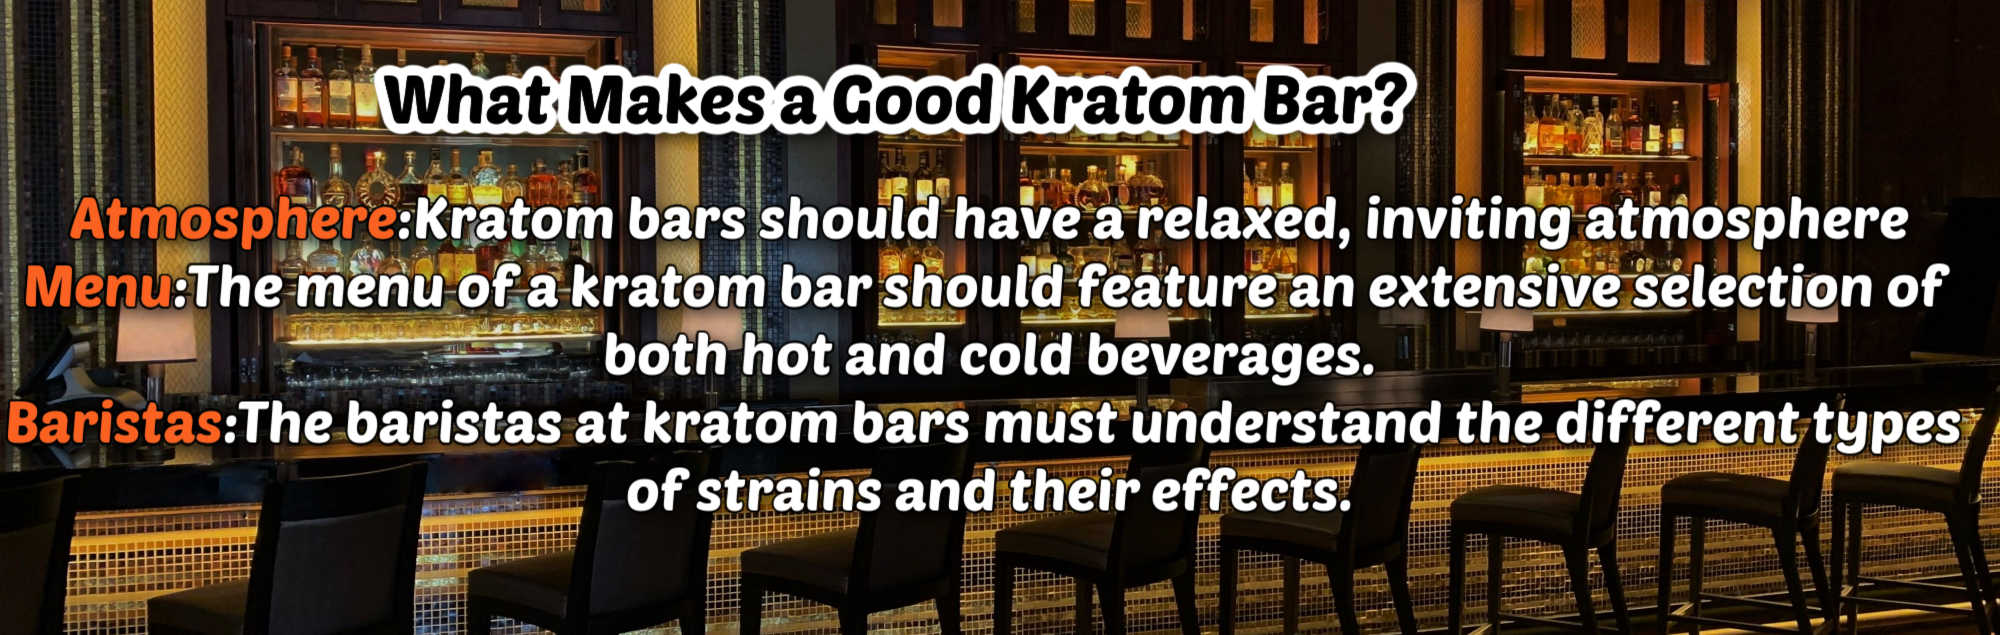 image of what makes a good kratom bar